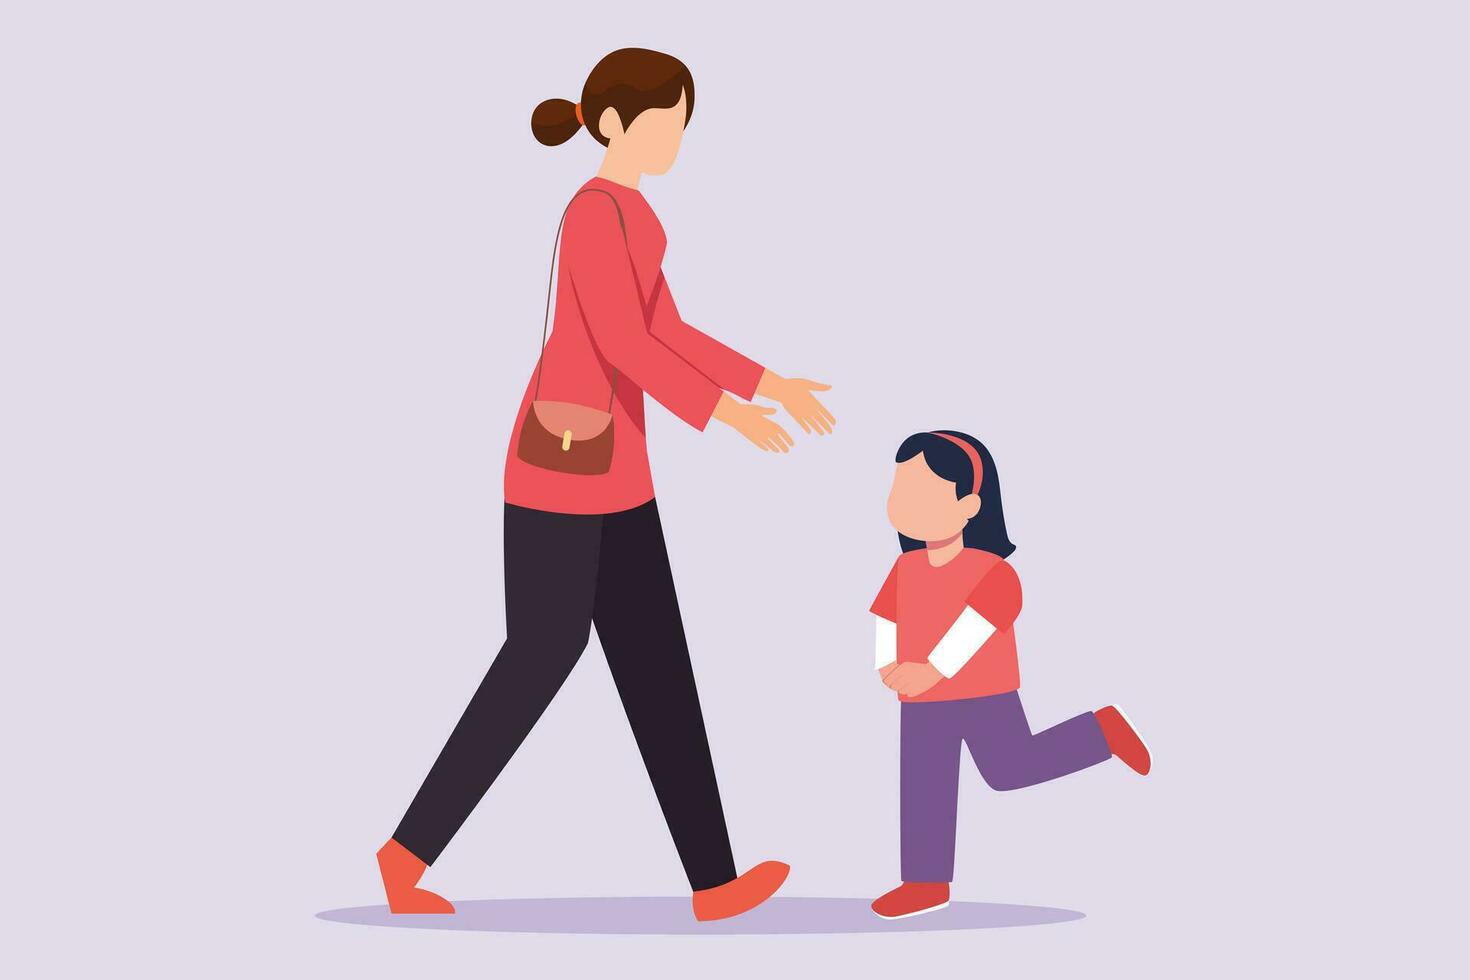 Family and children spending time together. Walking family concept. Colored flat vector illustration isolated.